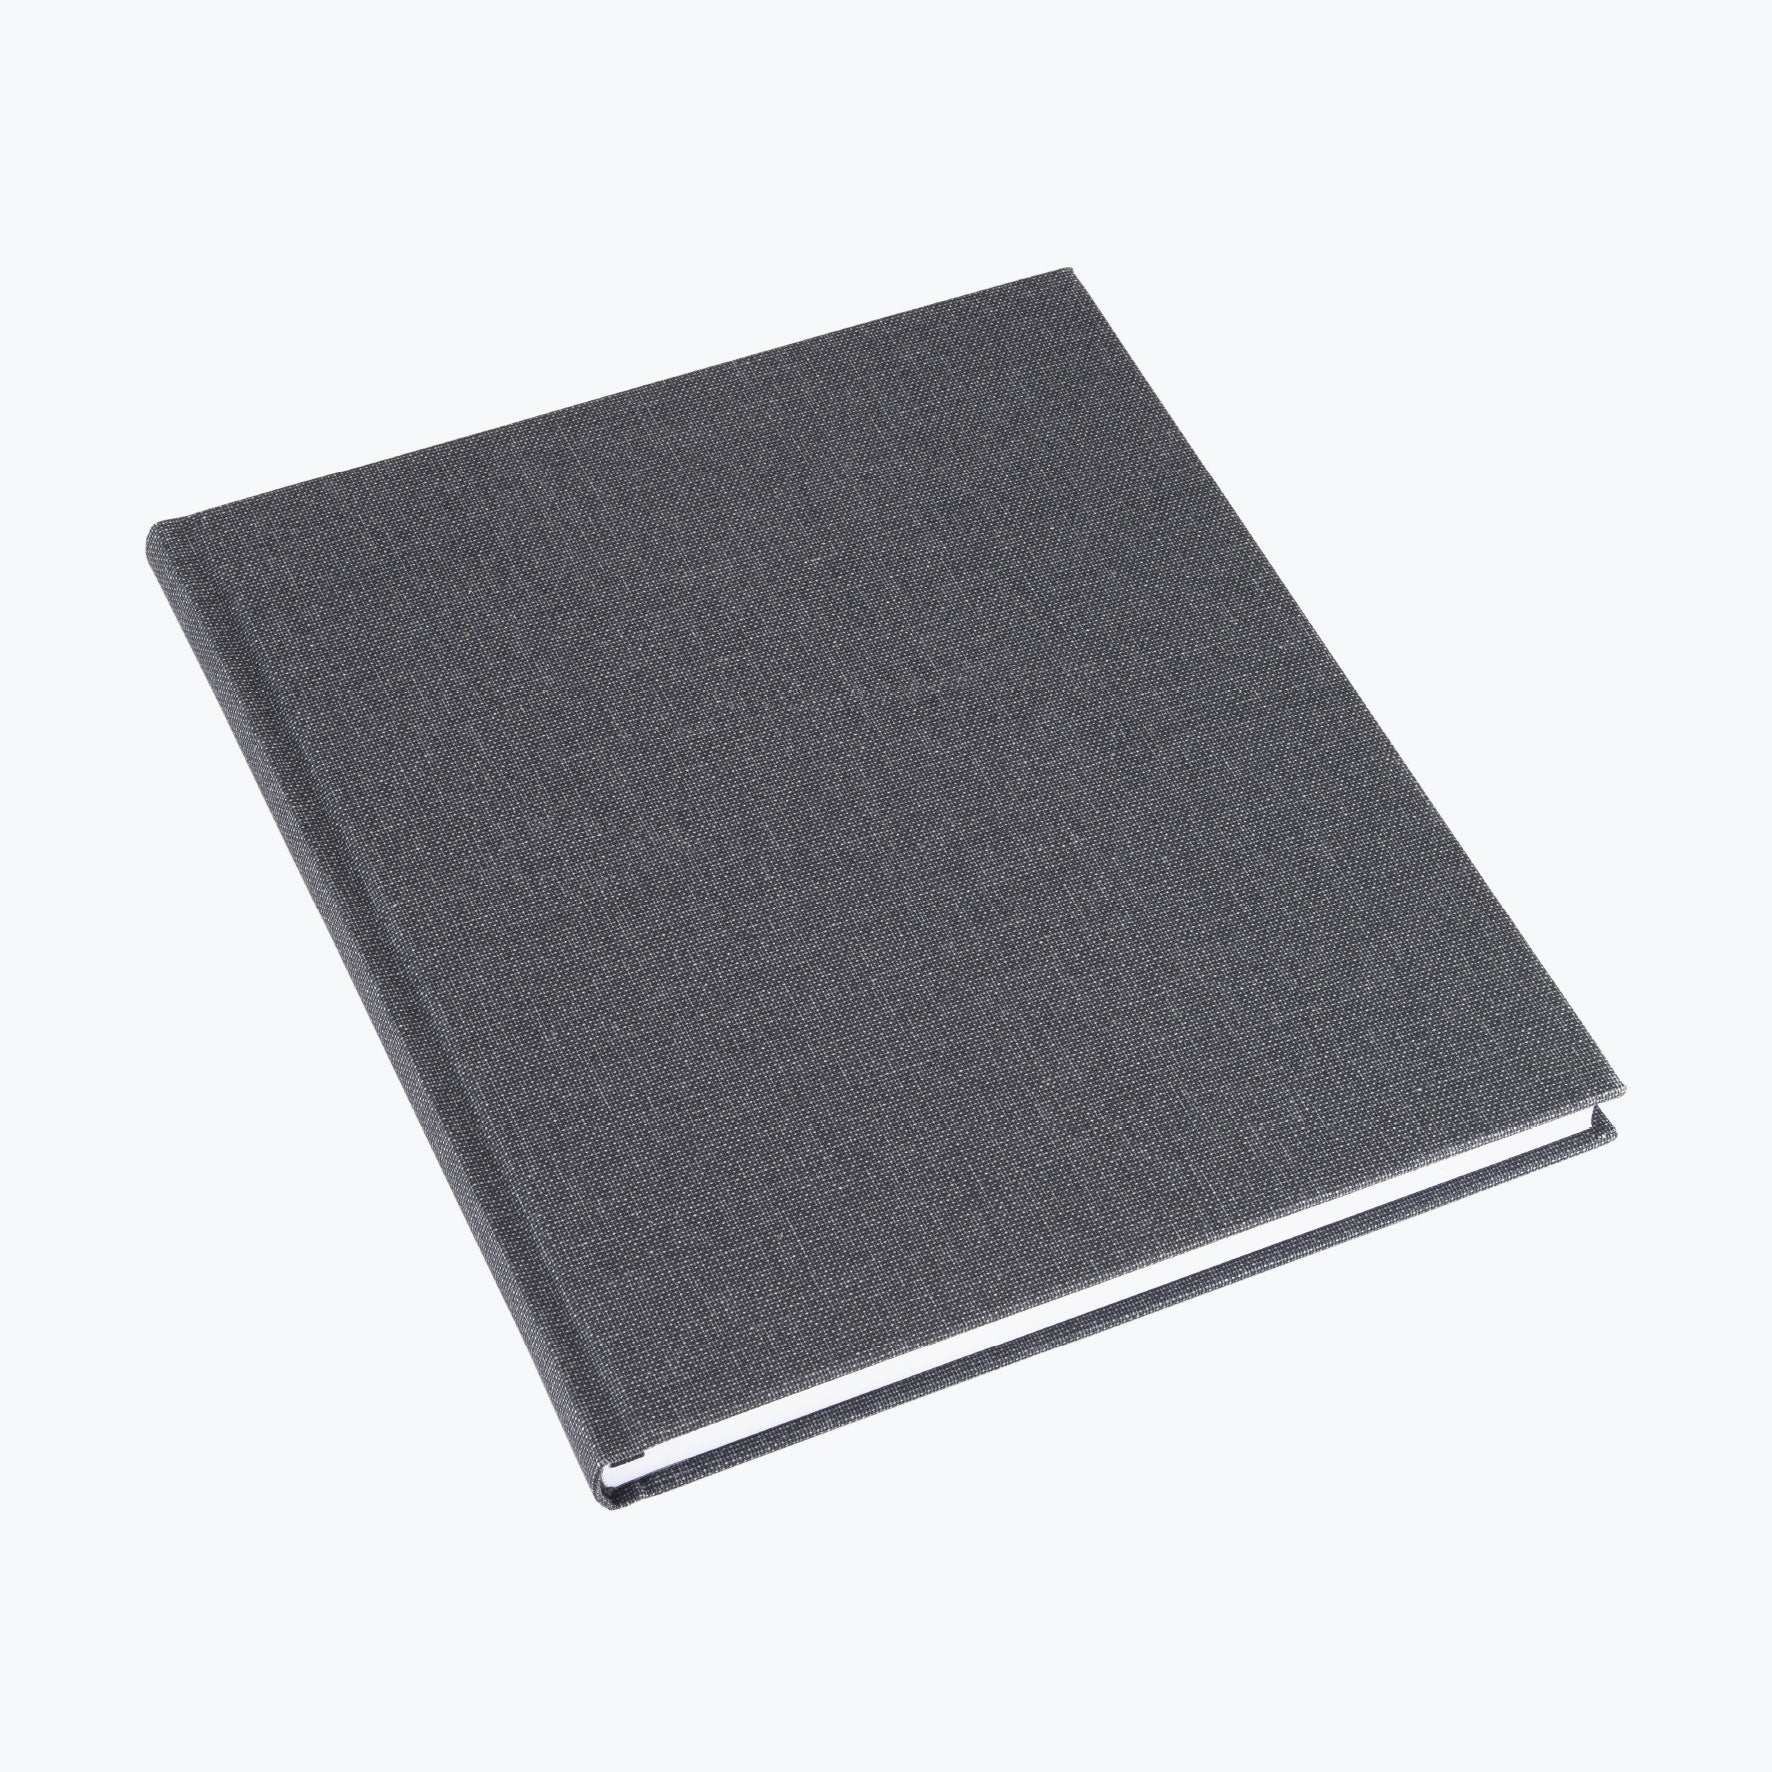 Bookbinders Design - Cloth Notebook - Large - Pepper <Outgoing>